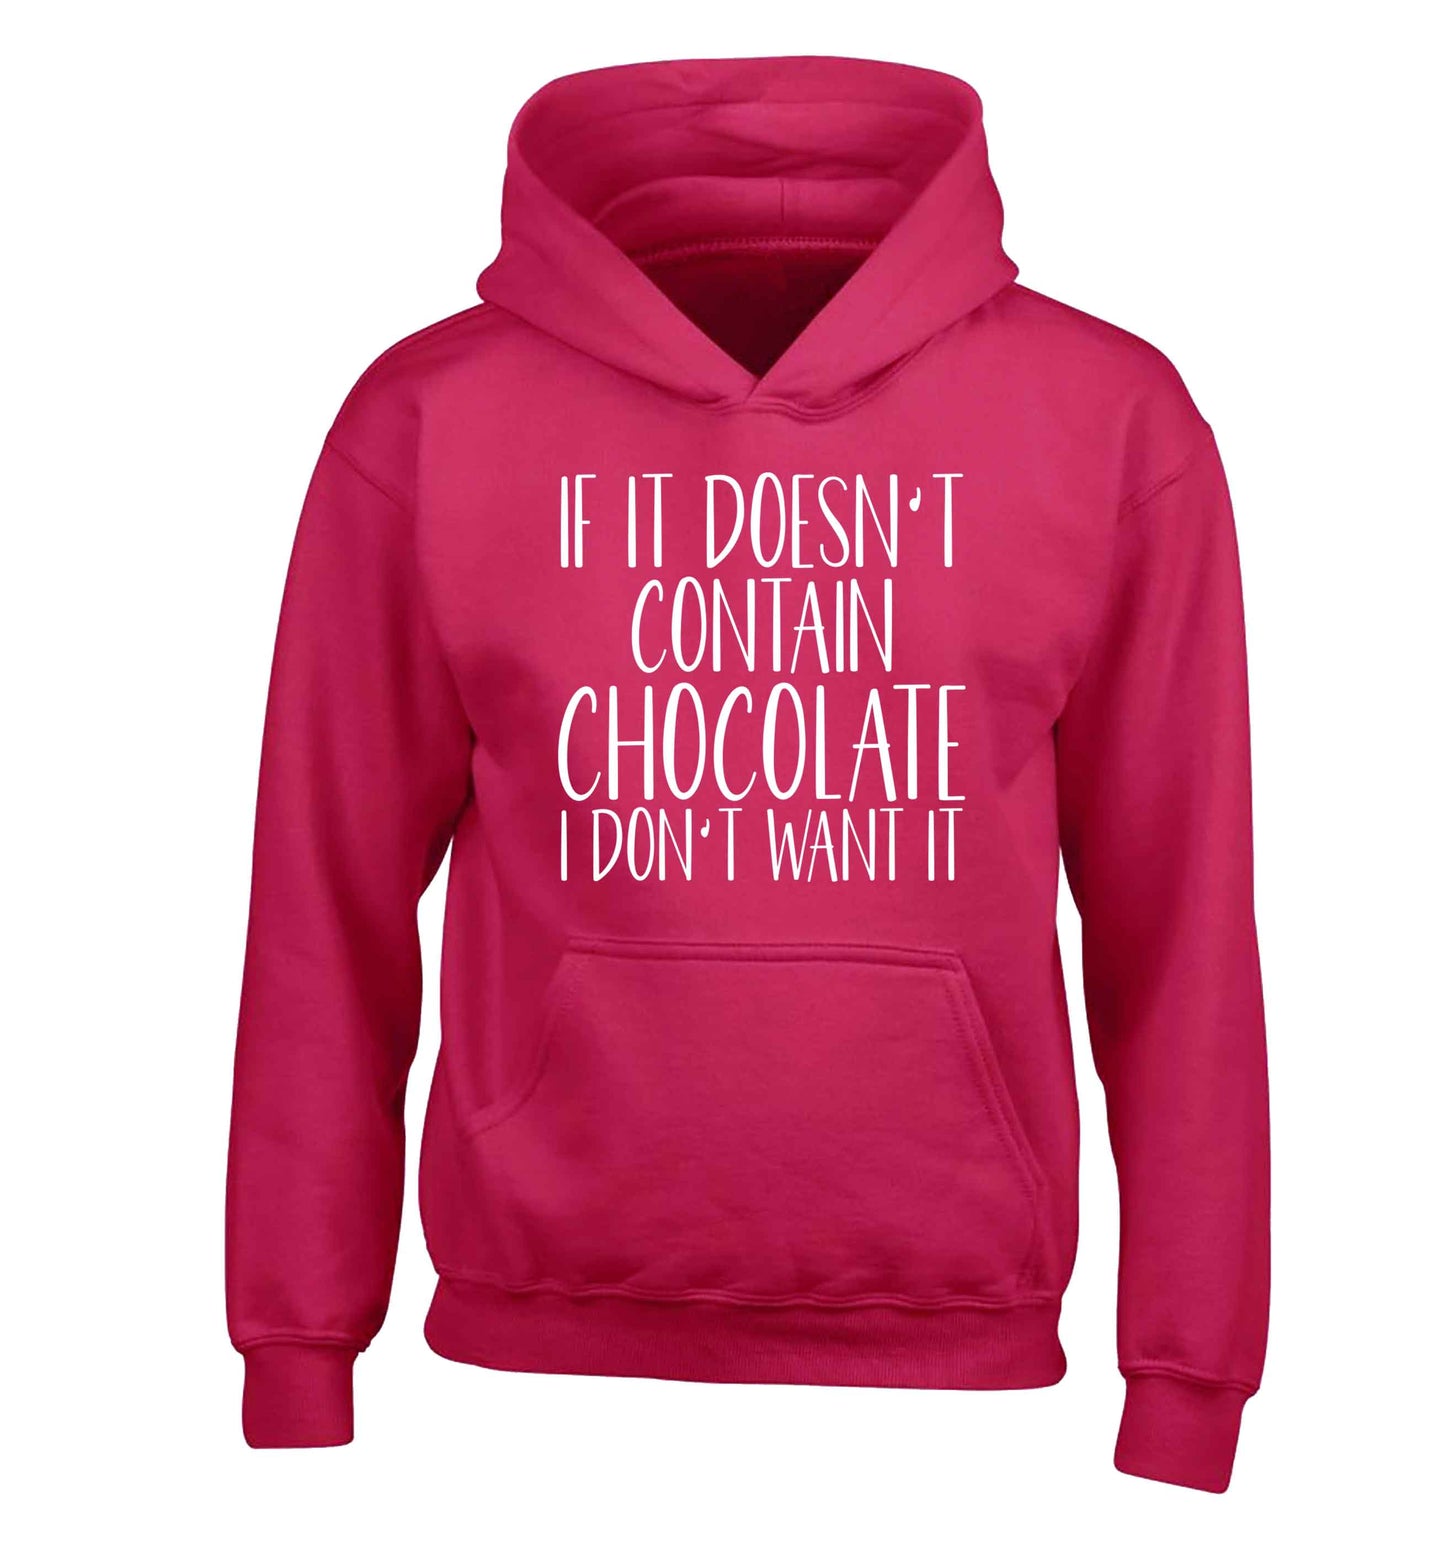 If it doesn't contain chocolate I don't want it children's pink hoodie 12-13 Years